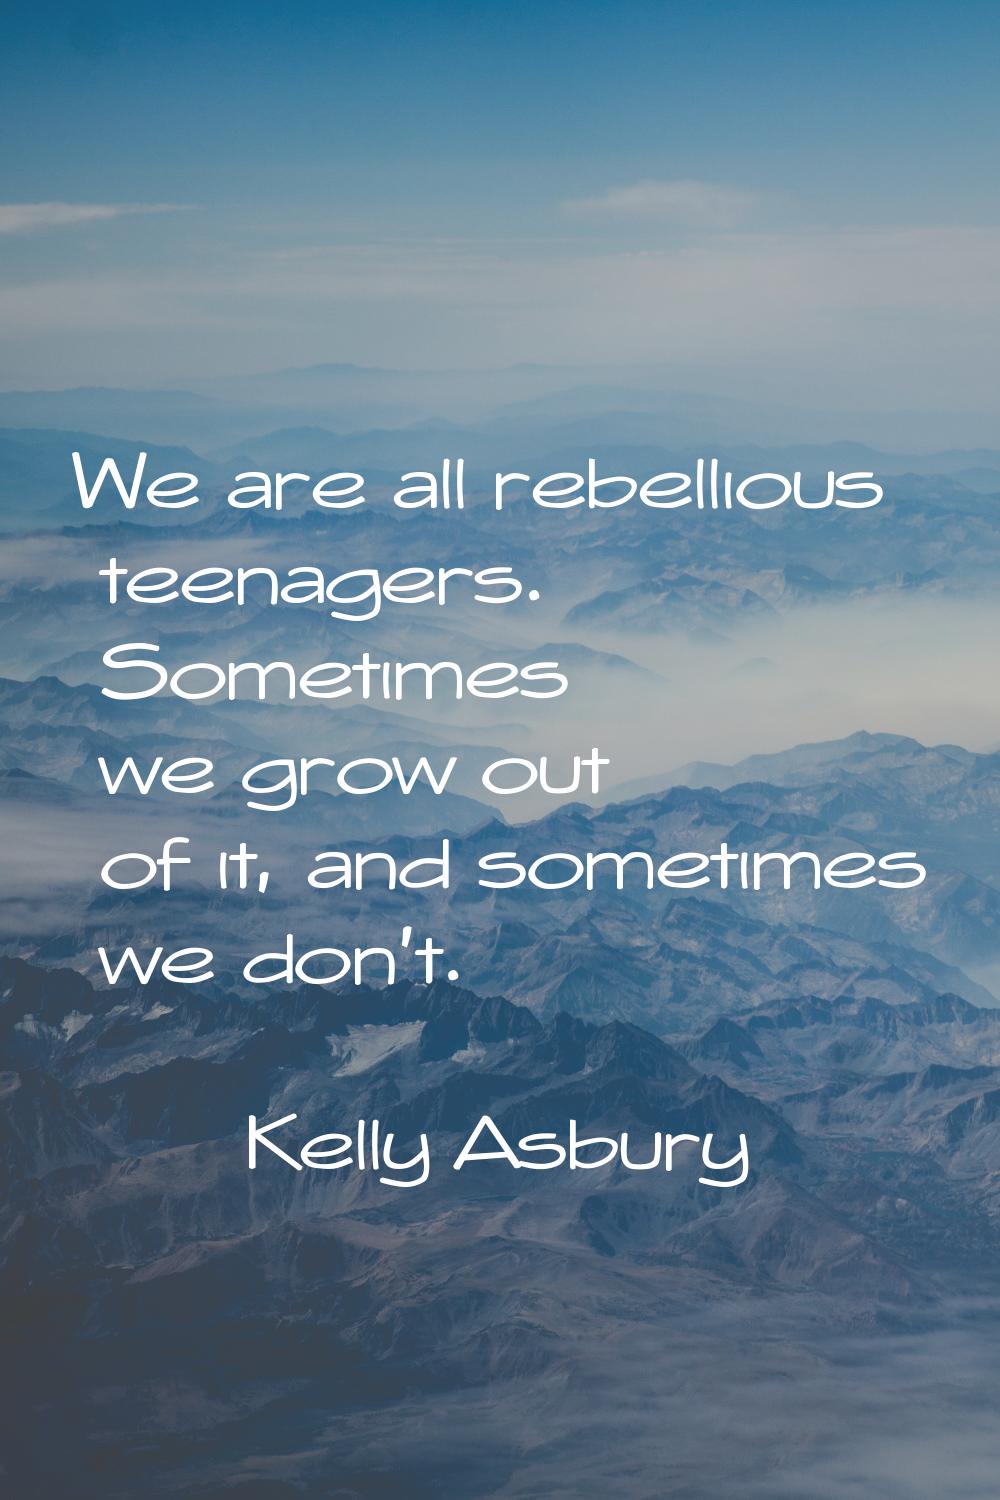 We are all rebellious teenagers. Sometimes we grow out of it, and sometimes we don't.